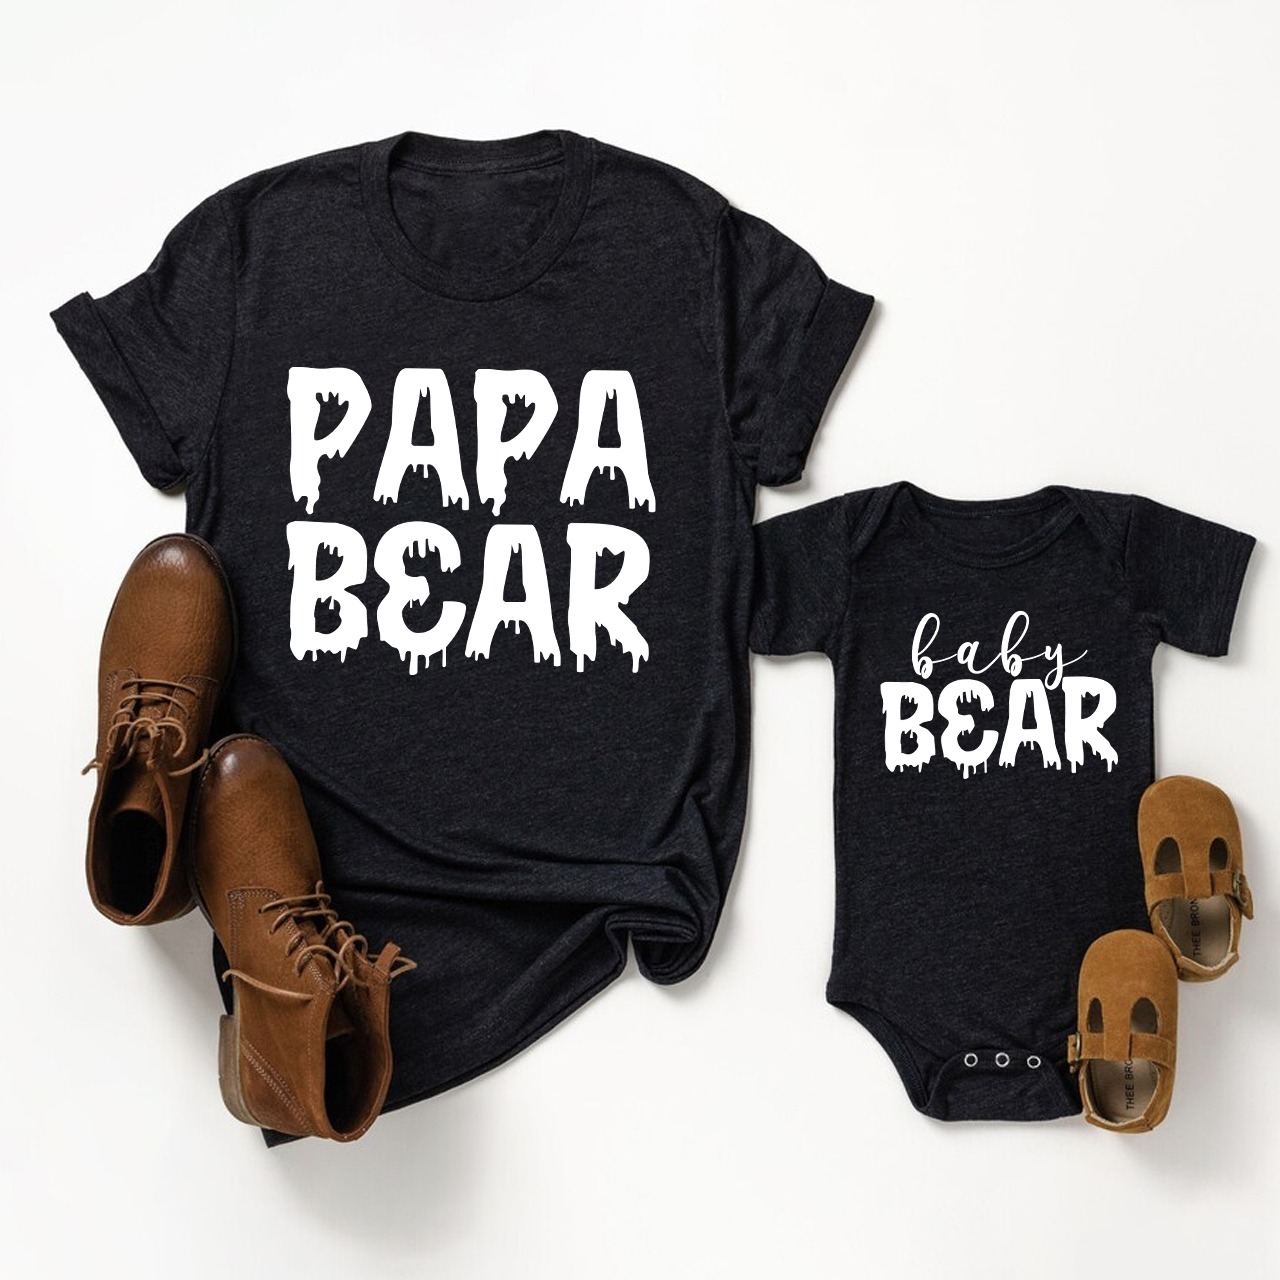 PAPA & baby BEAR Matching Shirt For Daddy And Me